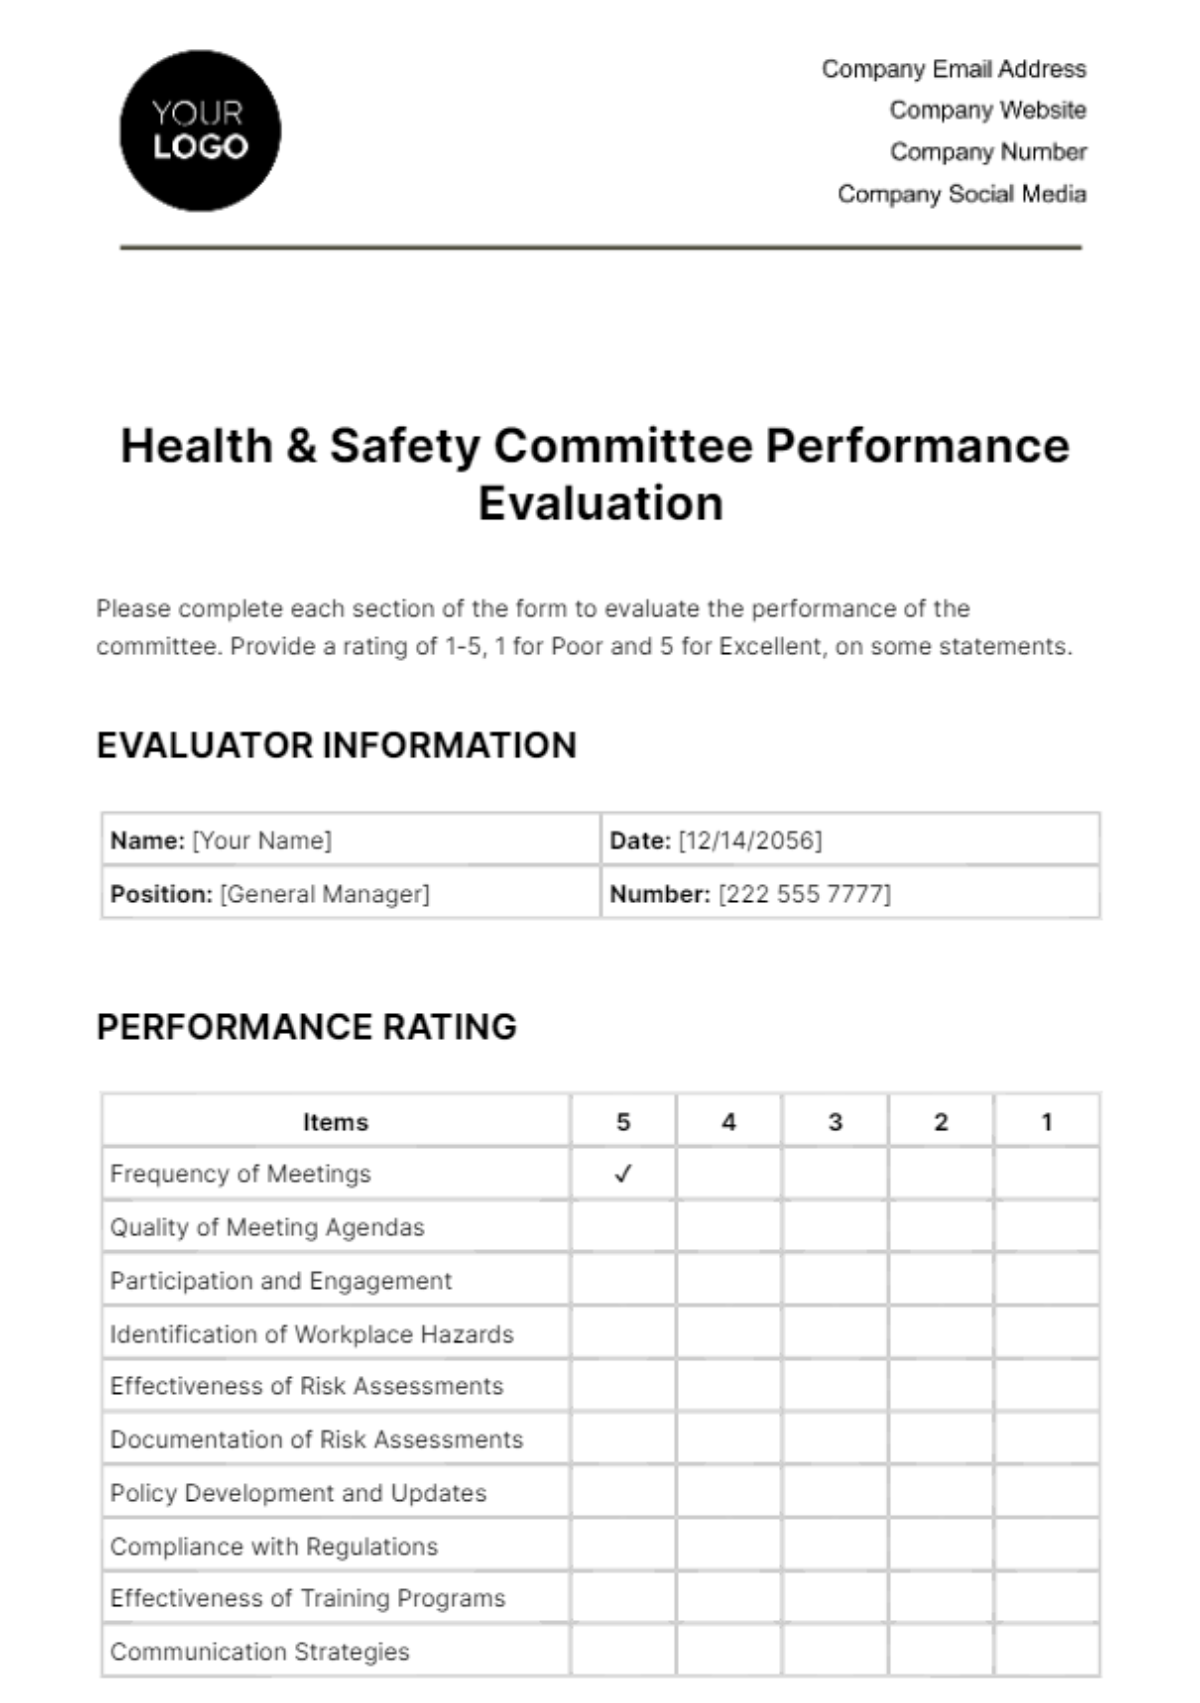 Free Health & Safety Committee Performance Evaluation Template